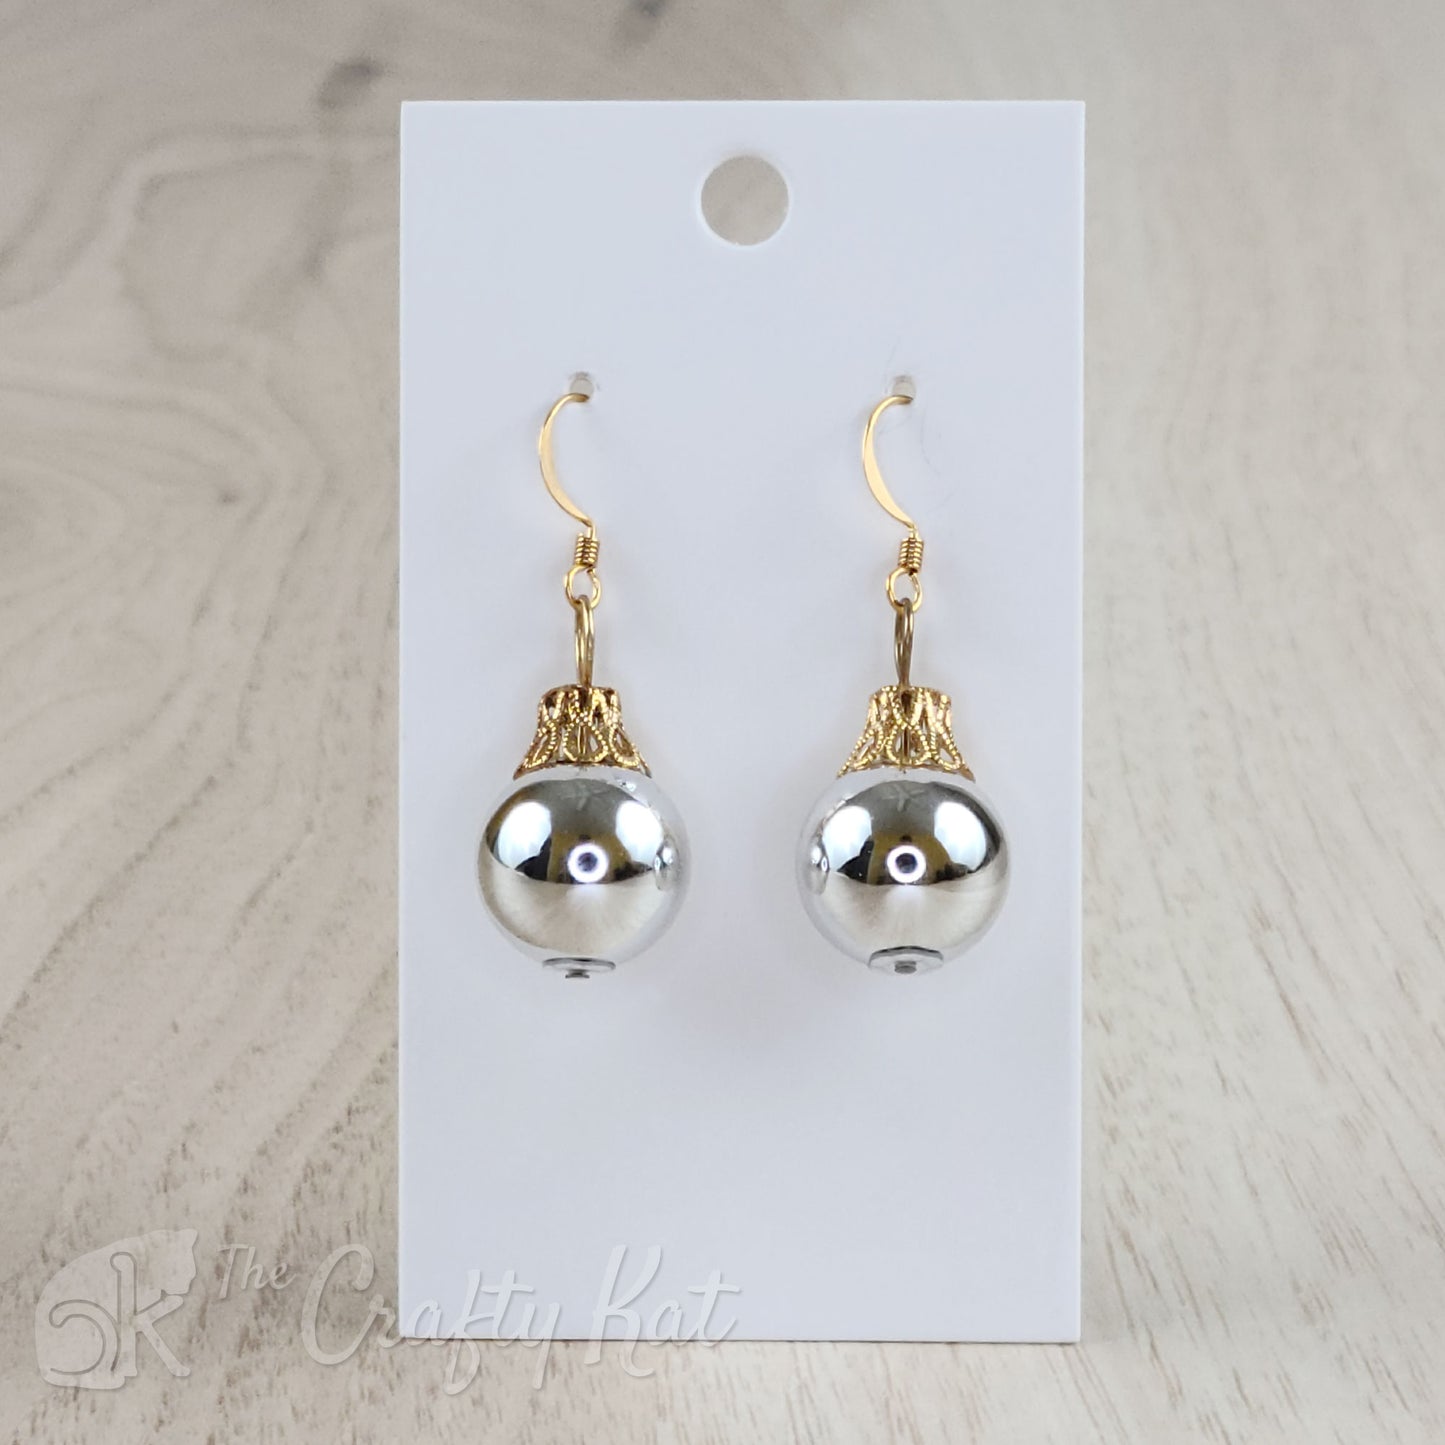 Each earring is a silver globe with a gold-plated filigree cap, giving each the appearance of a classic holiday tree ornament.